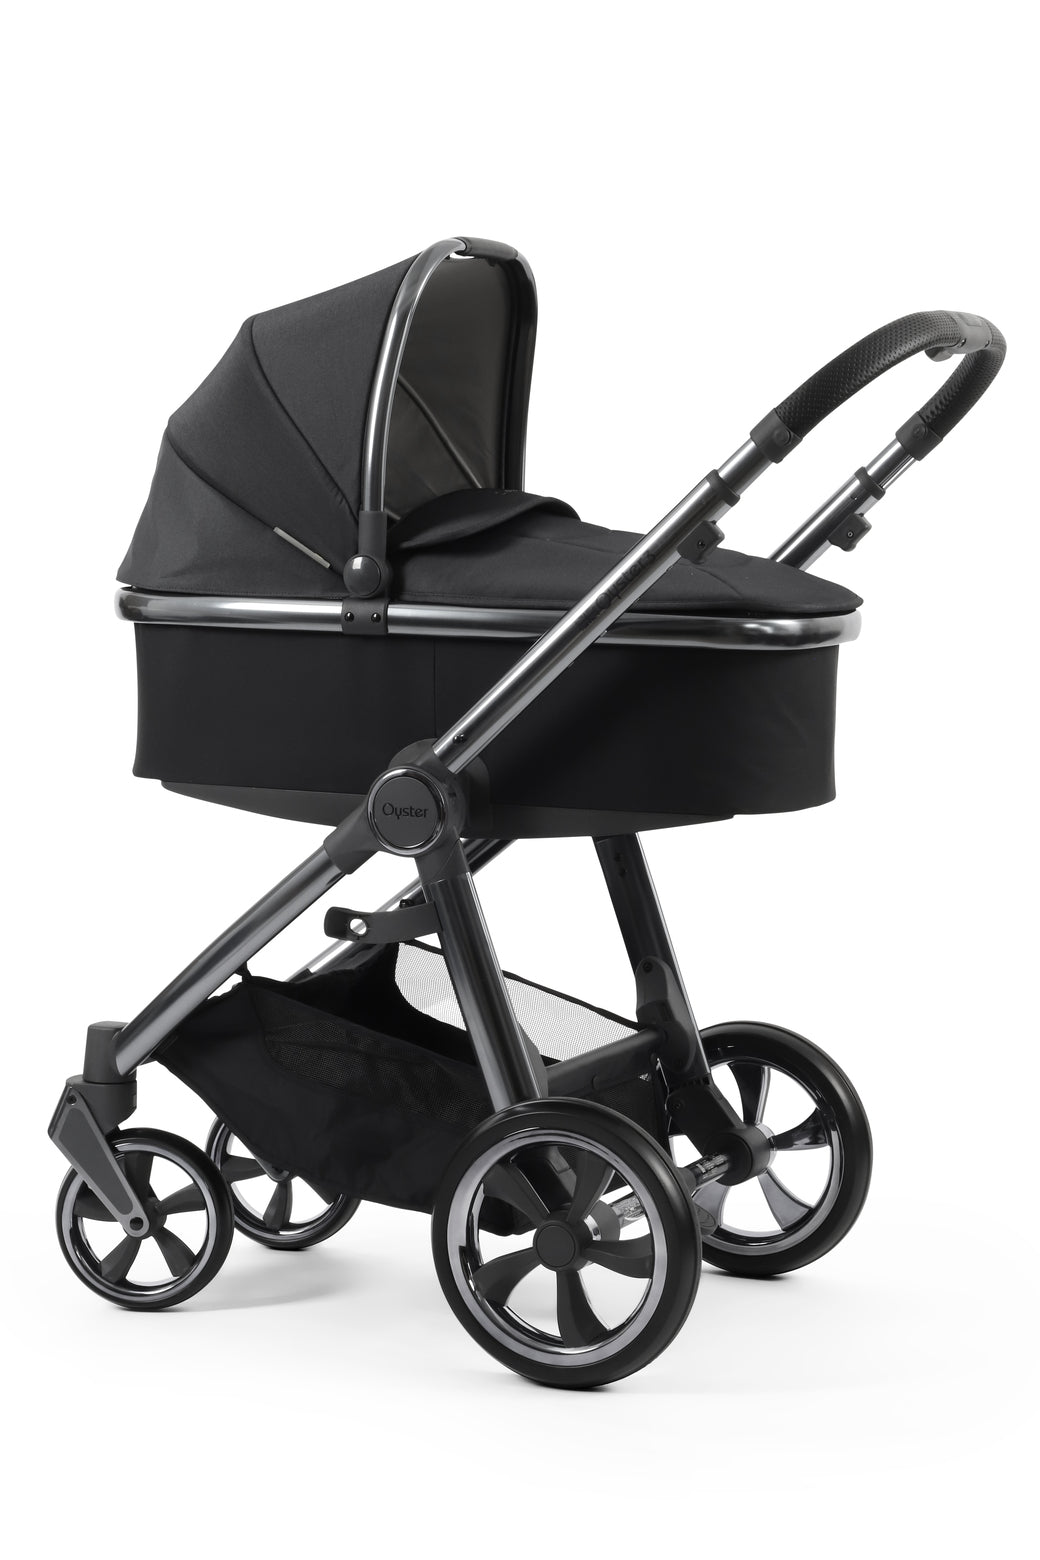 BabyStyle Oyster 3 Carrycot - Carbonite -  | For Your Little One